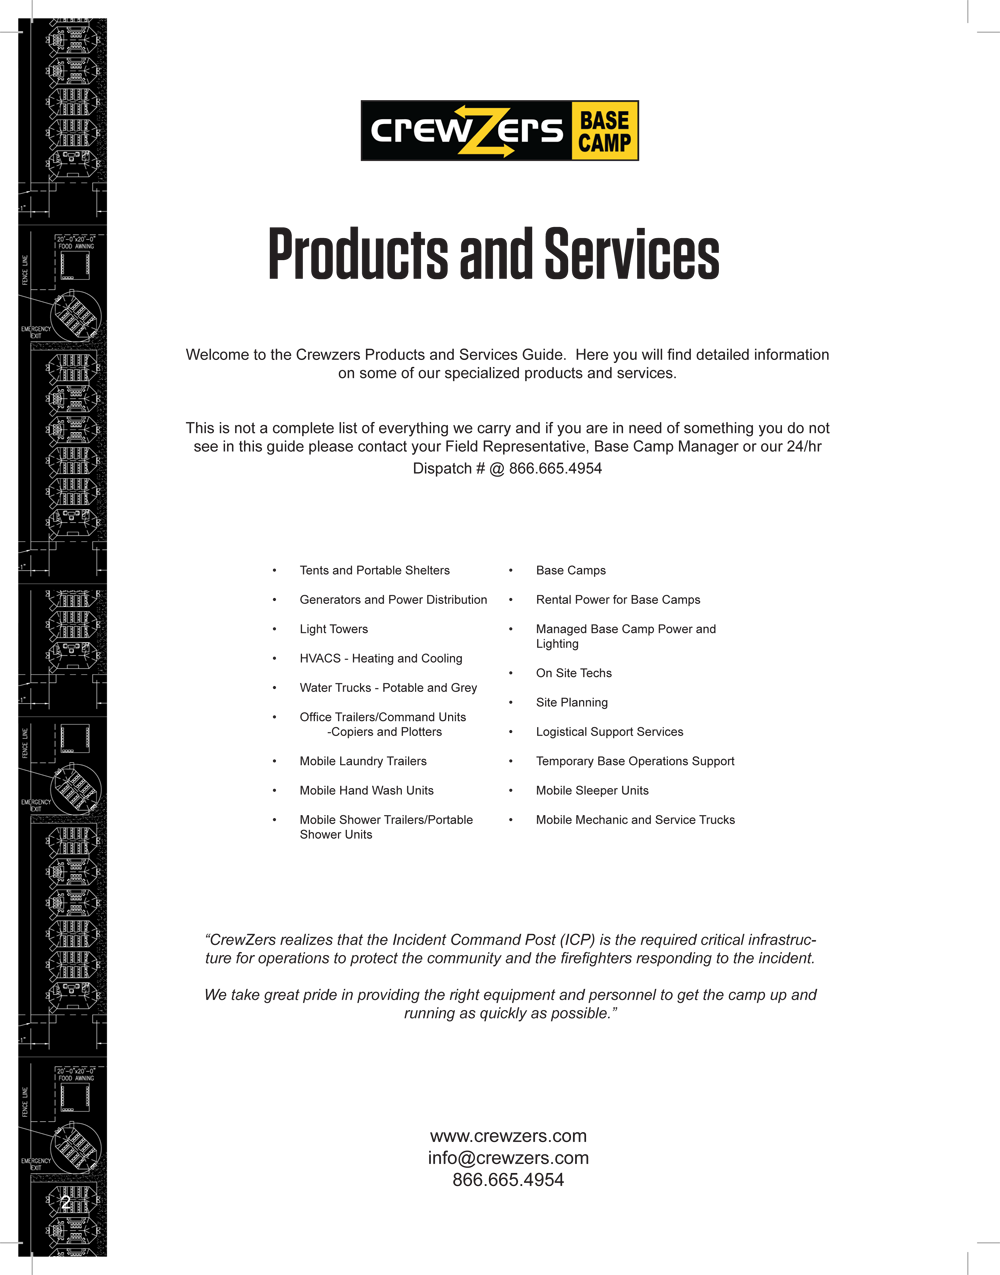 Crewzers Products and Services